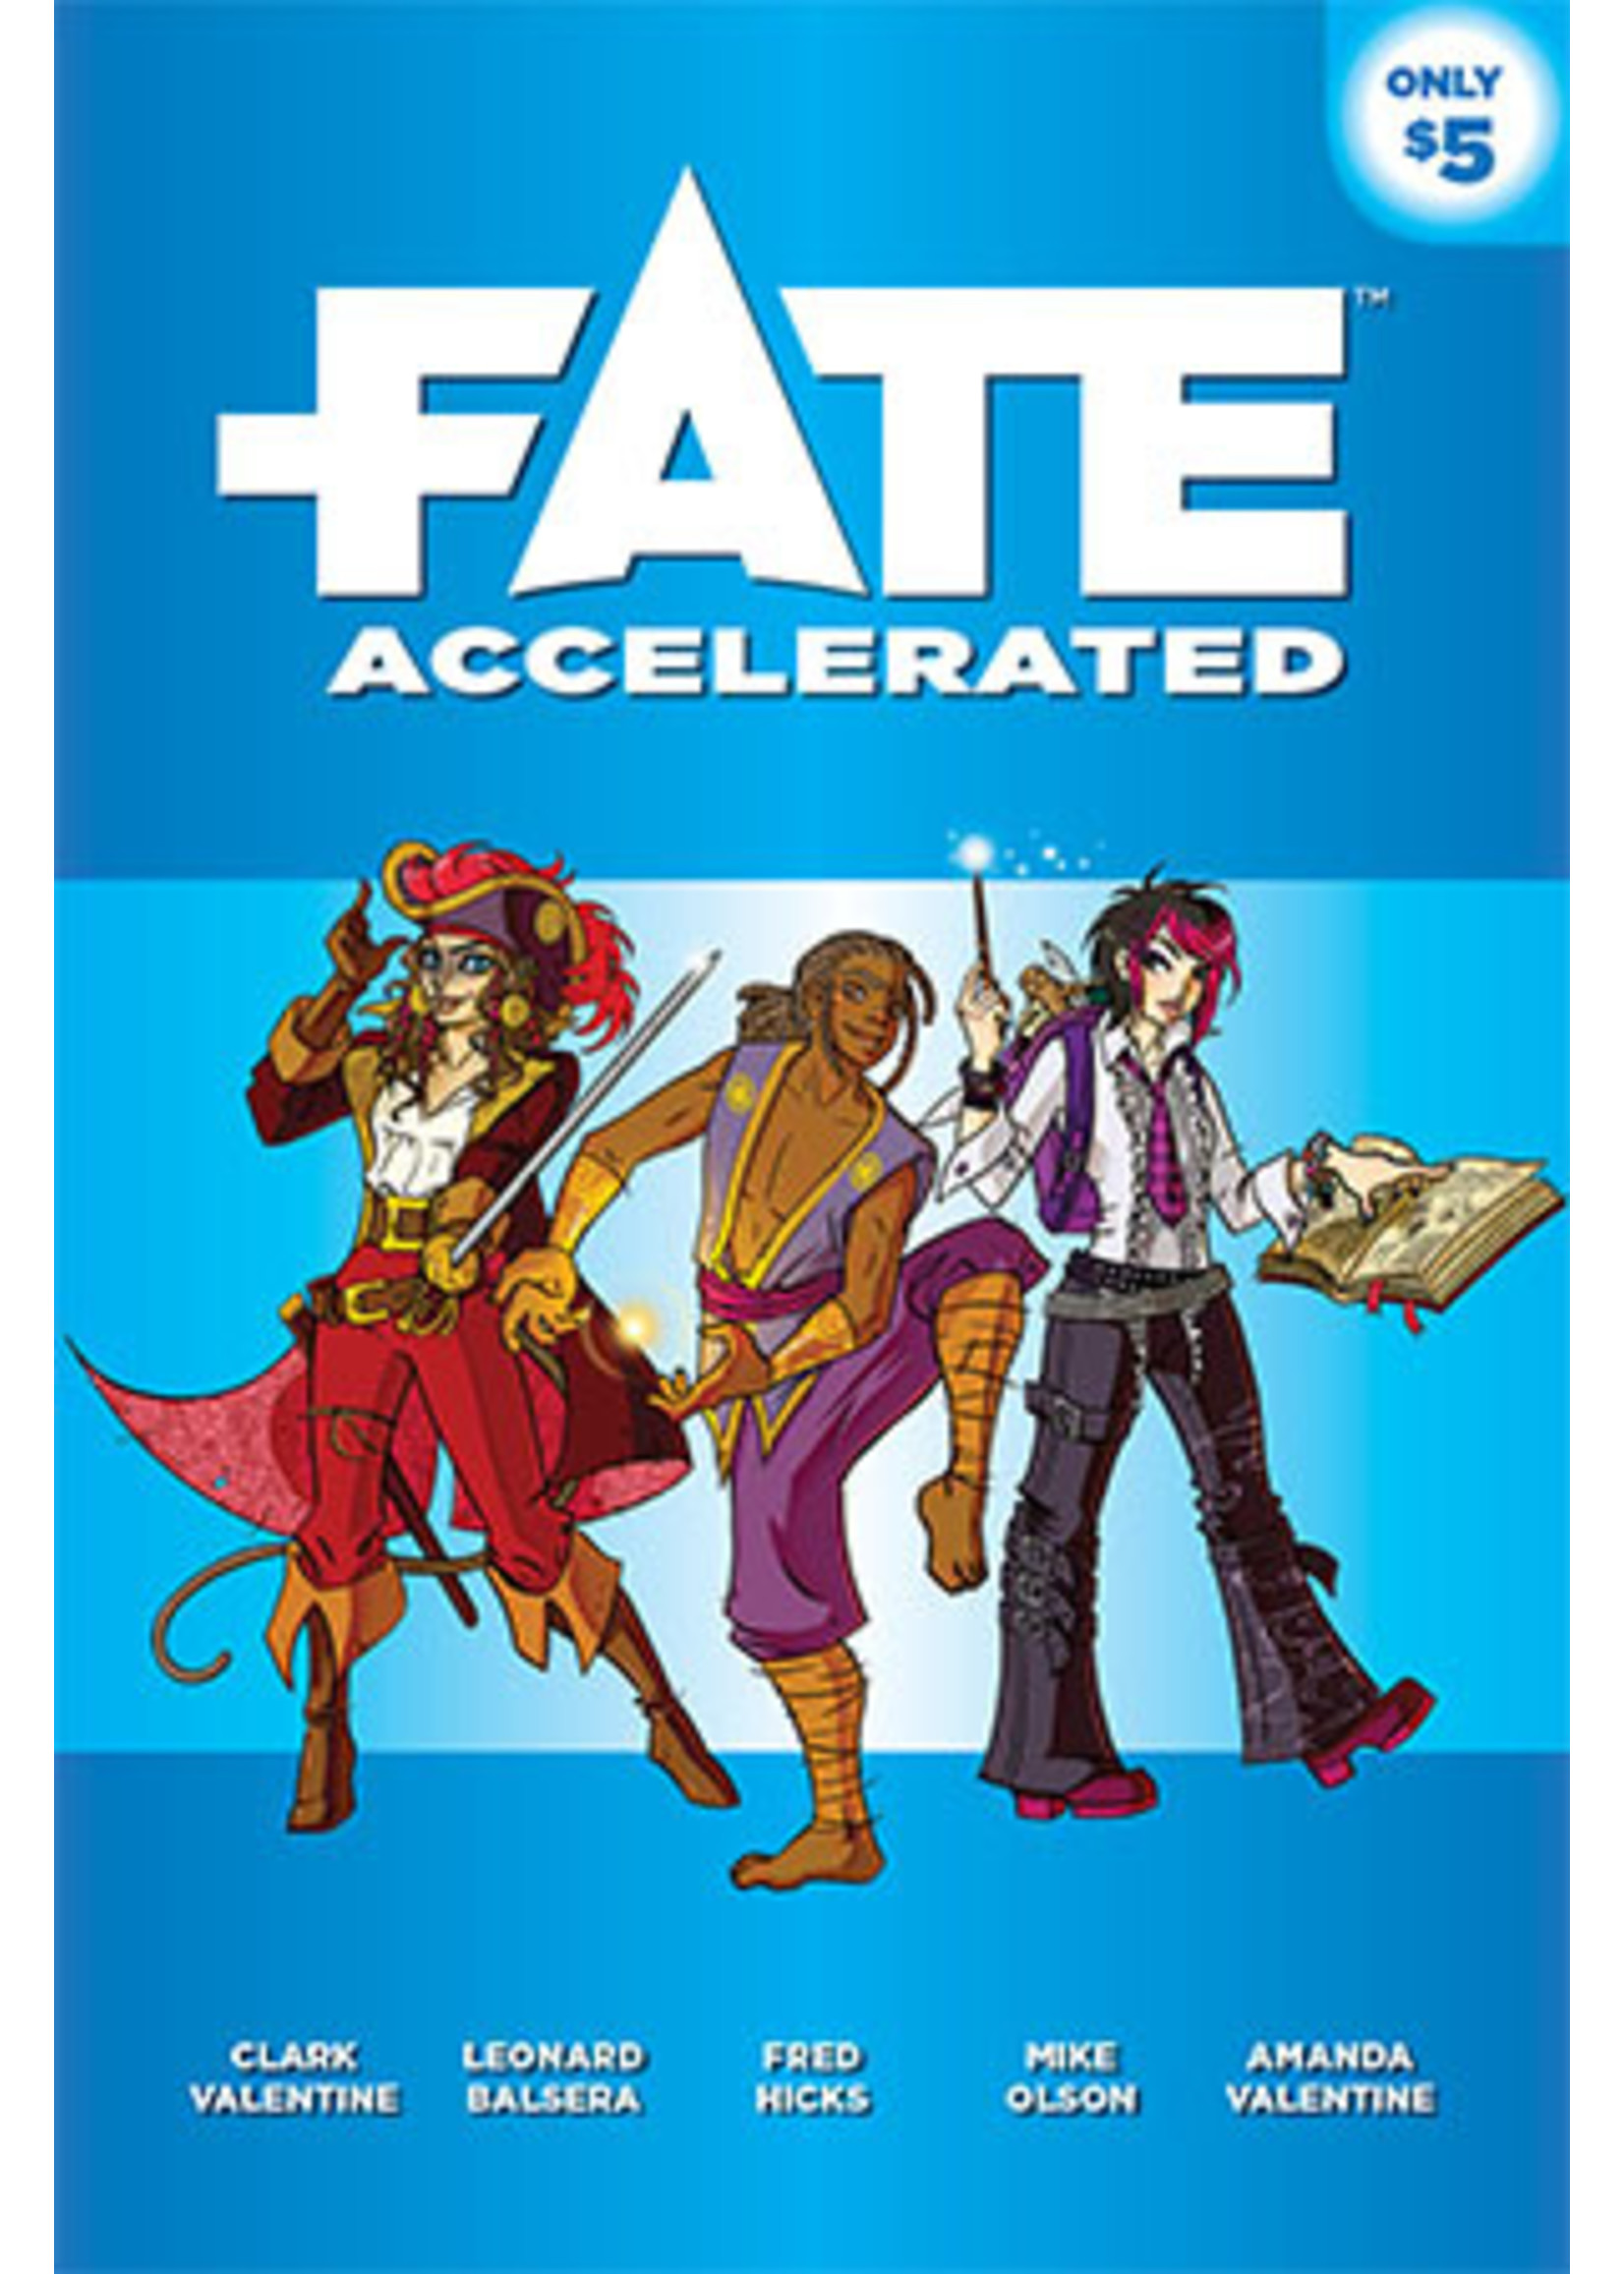 Evil Hat Productions Fate: Fate Accelerated